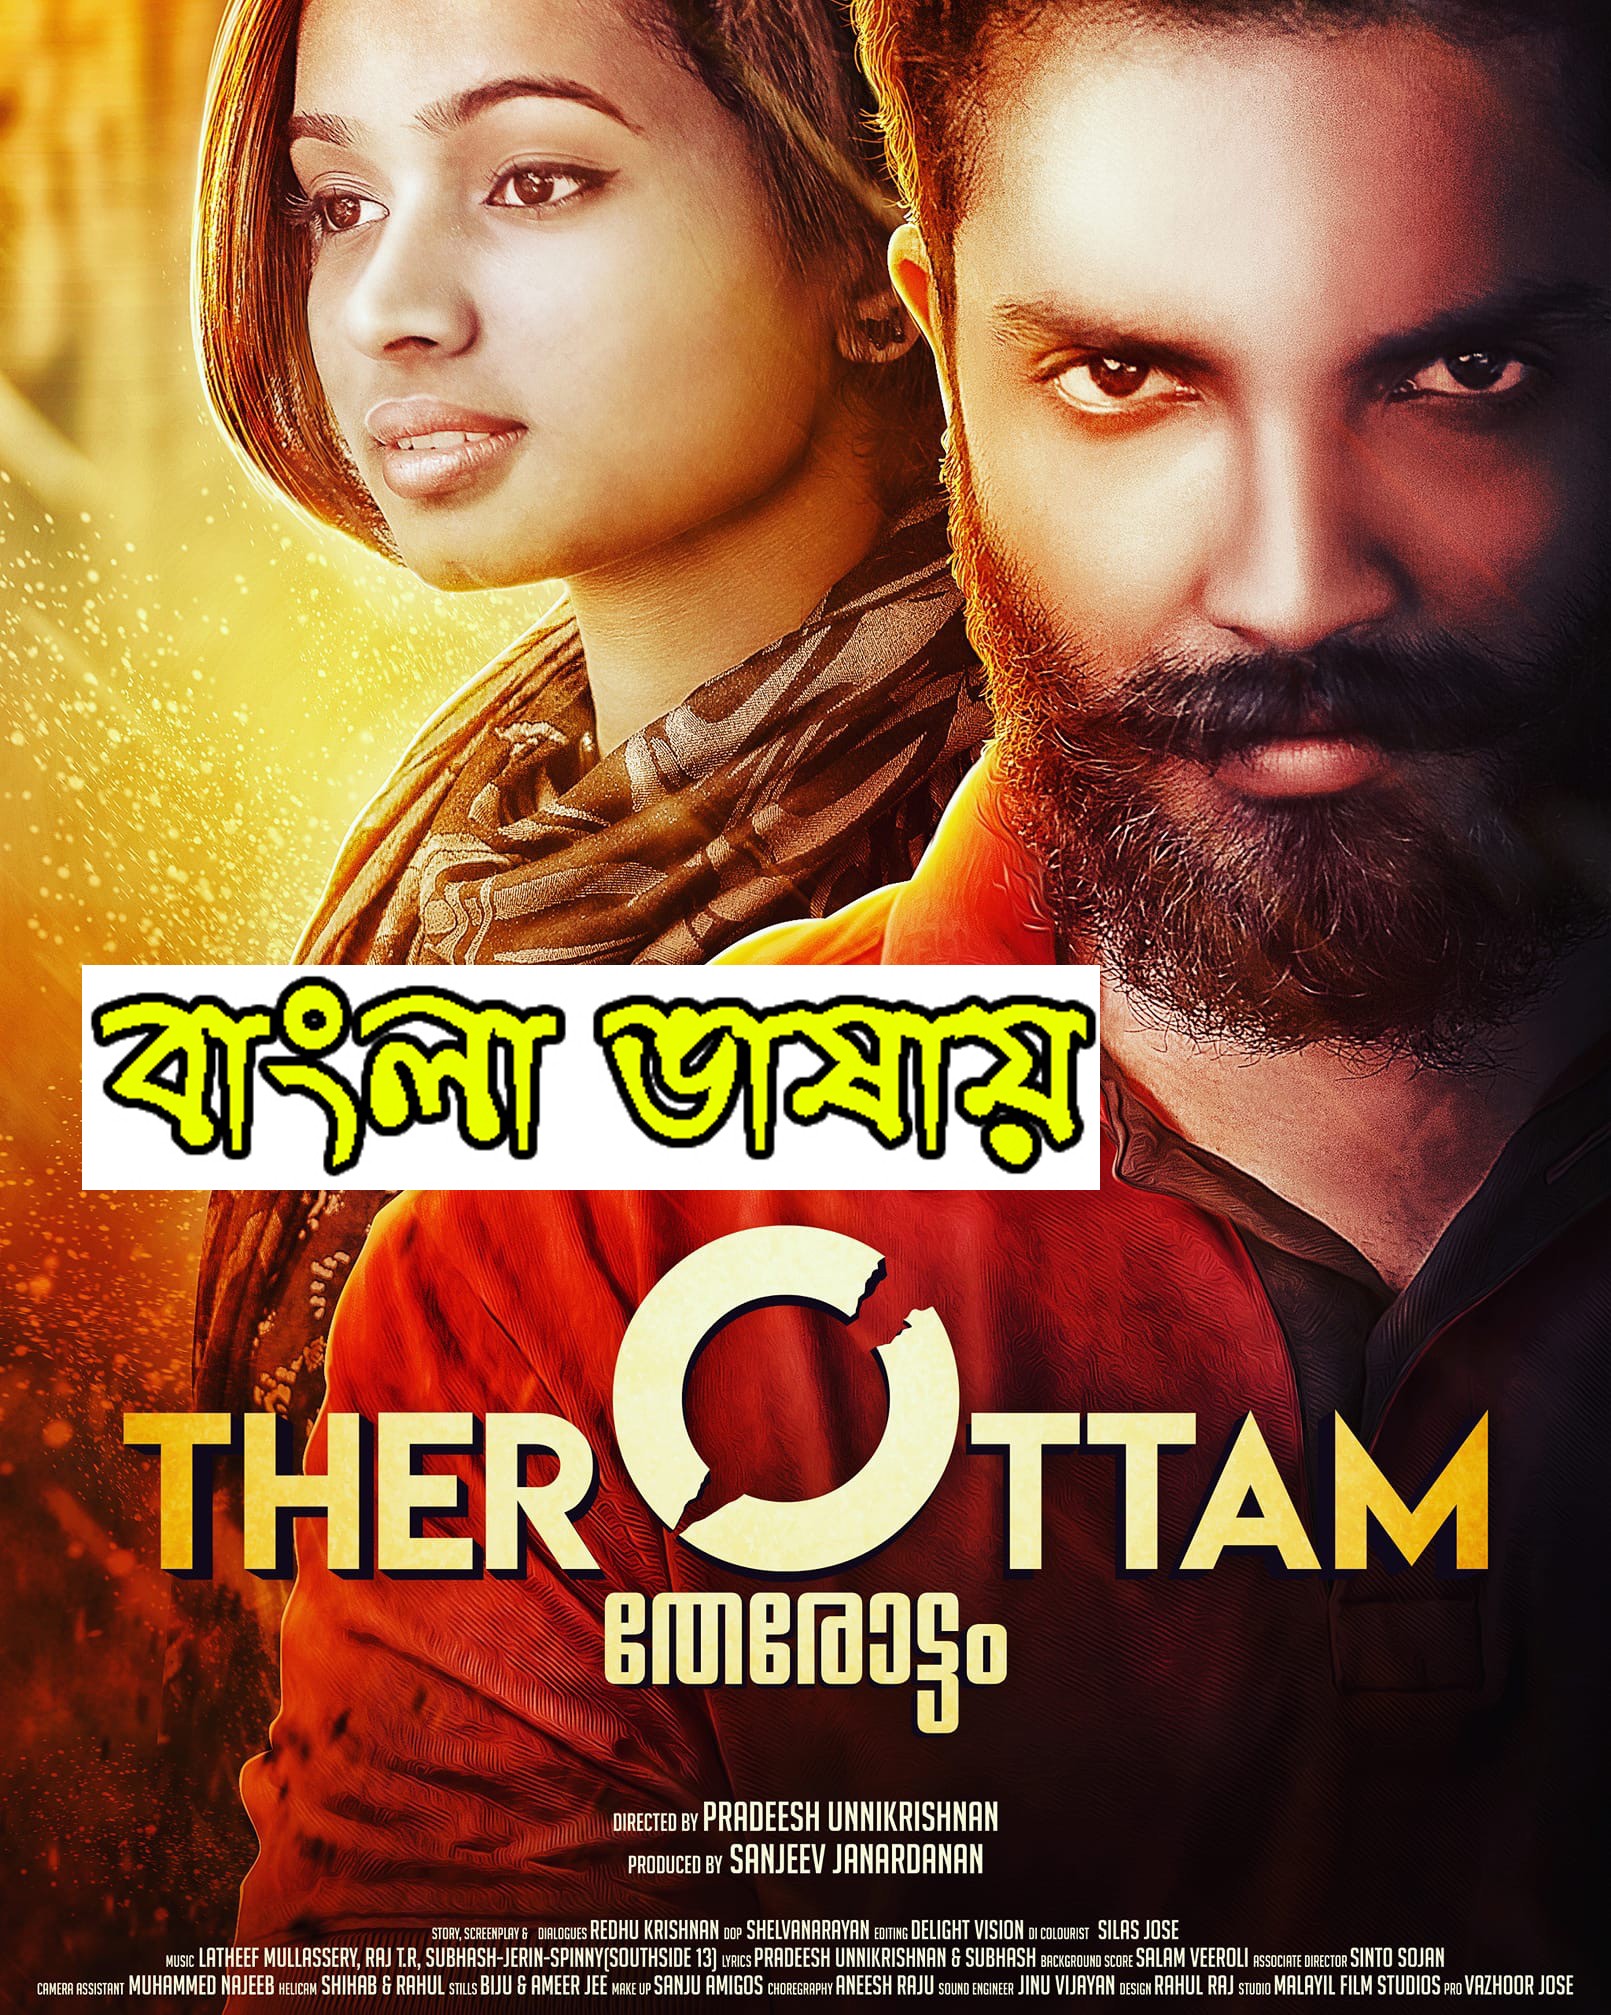 Therottam 2022 Bengali Dubbed 720p HDRip 900MB Download